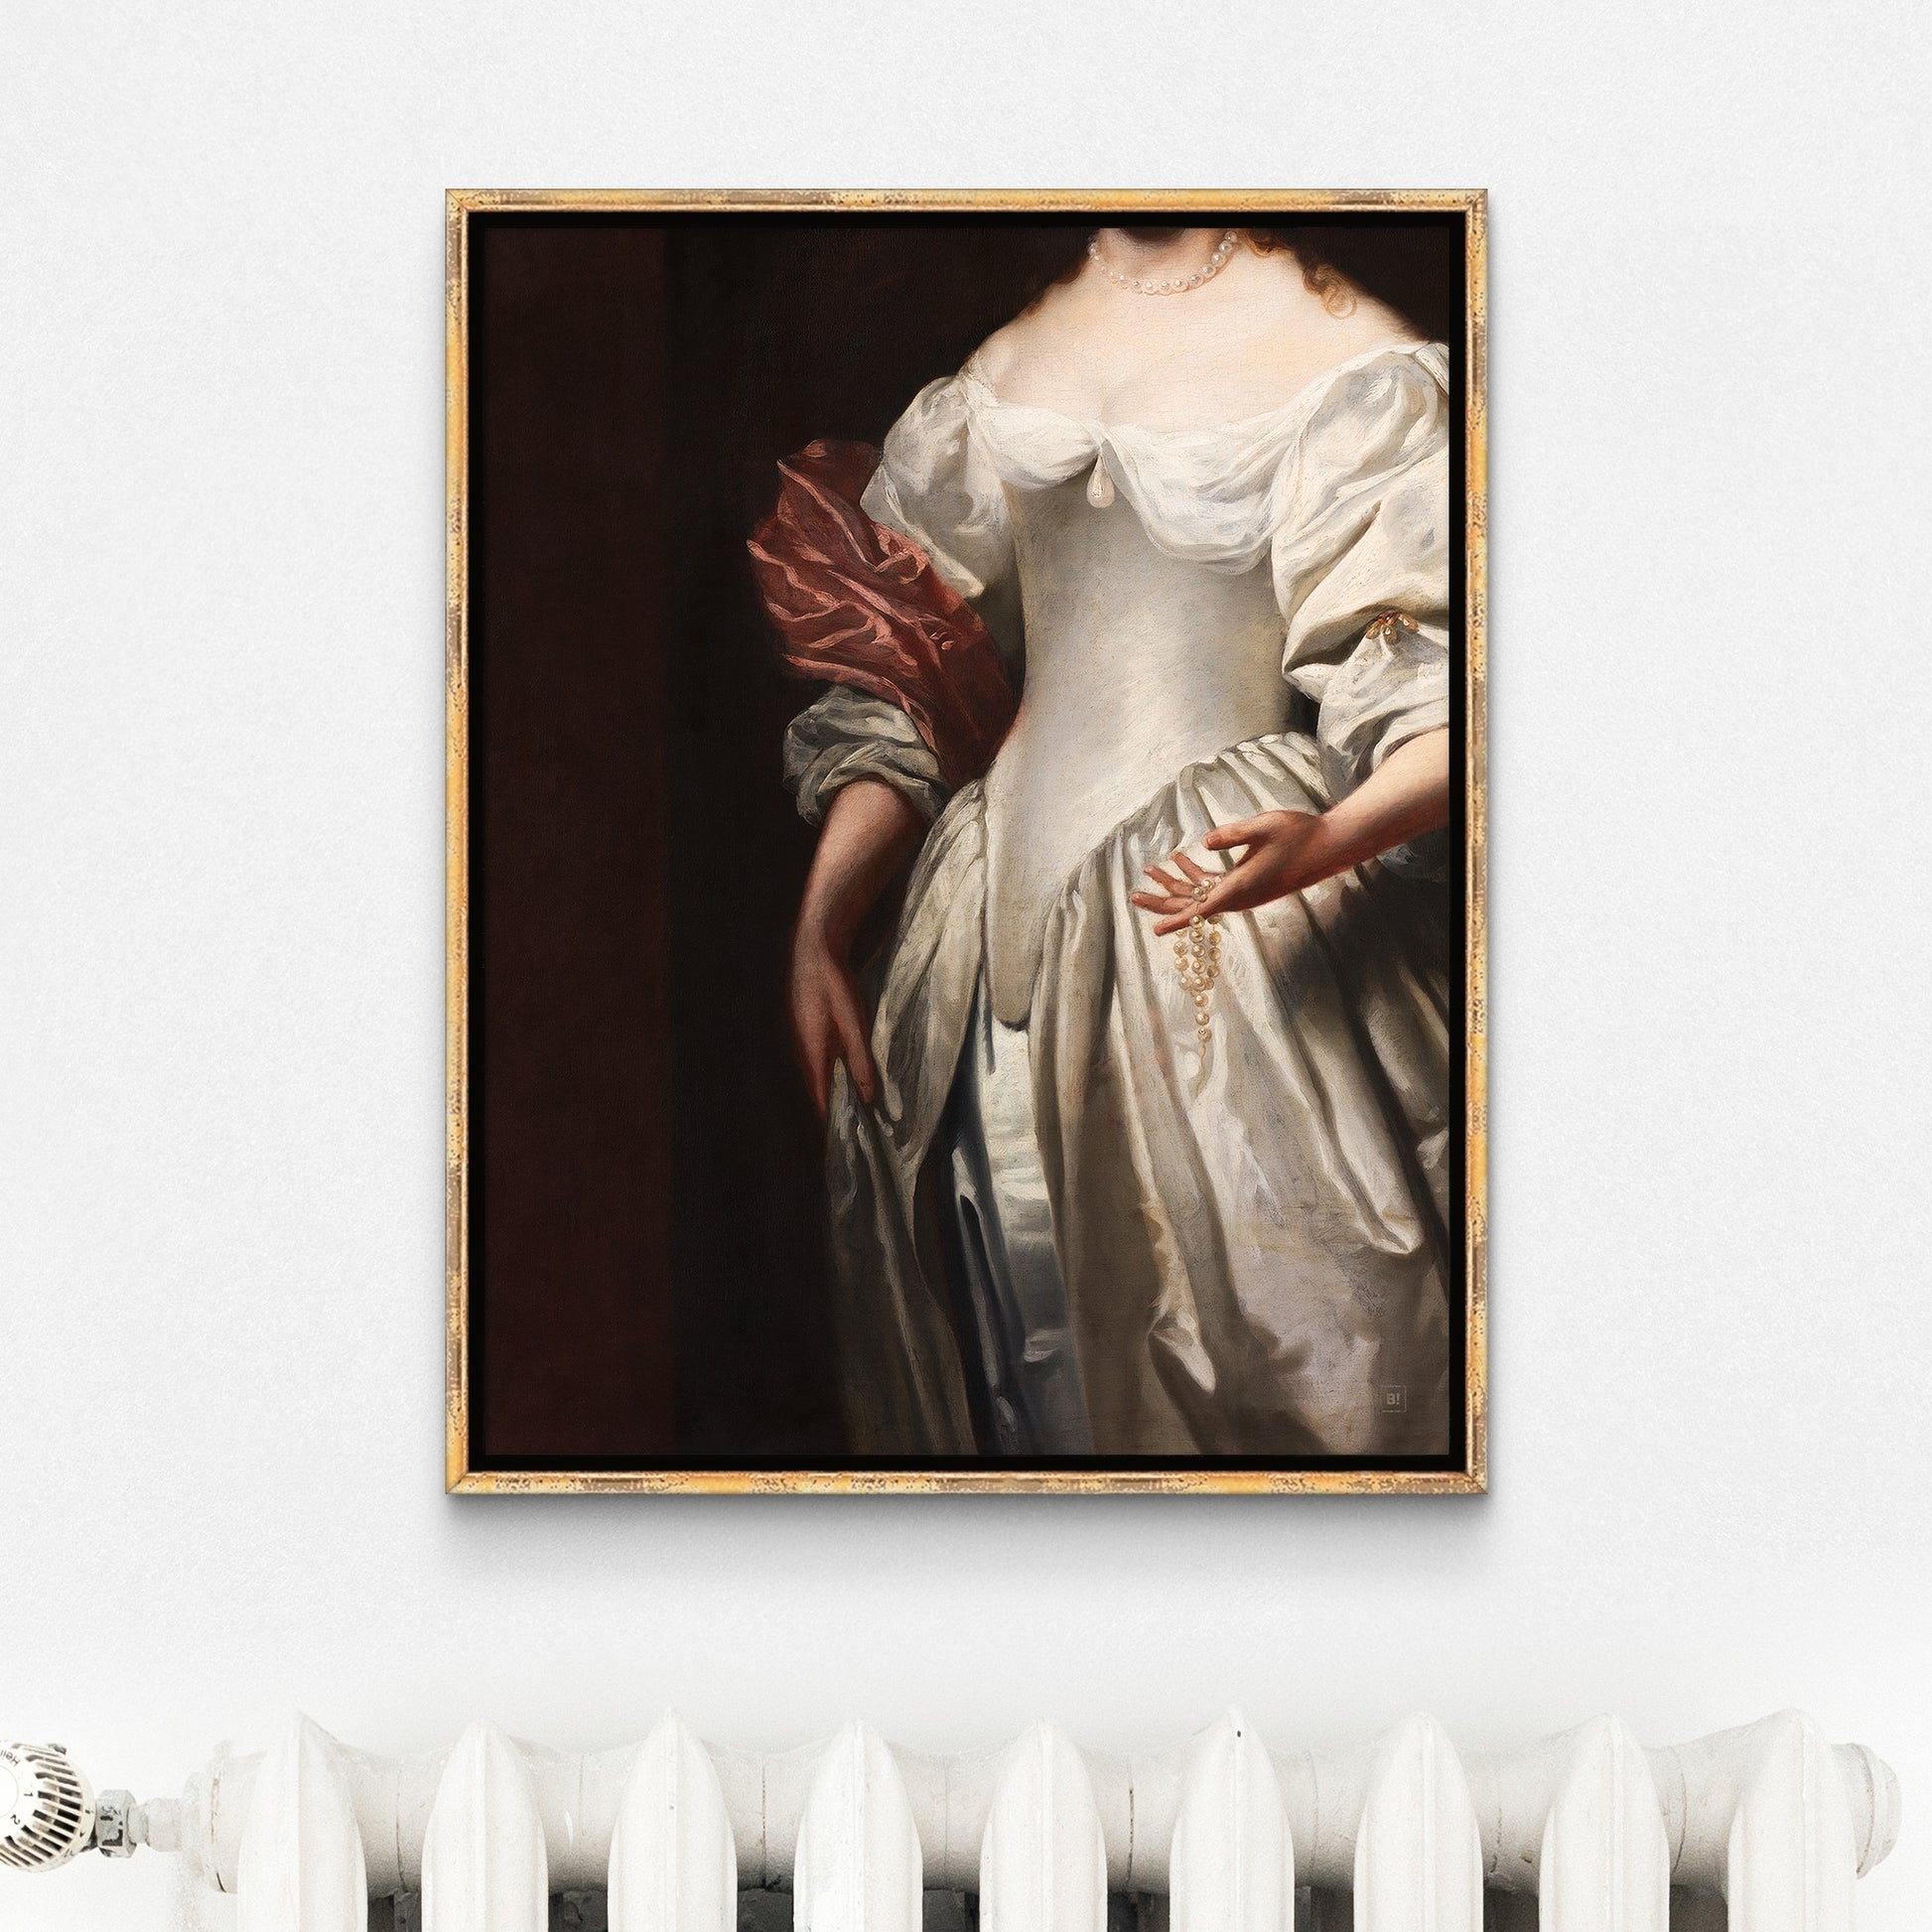 Be inspired by our altered Victorian Woman in White Satin Dress art print. This artwork was printed using the giclée process on archival acid-free paper and is presented in an antique gold frame that captures its timeless beauty in every detail.